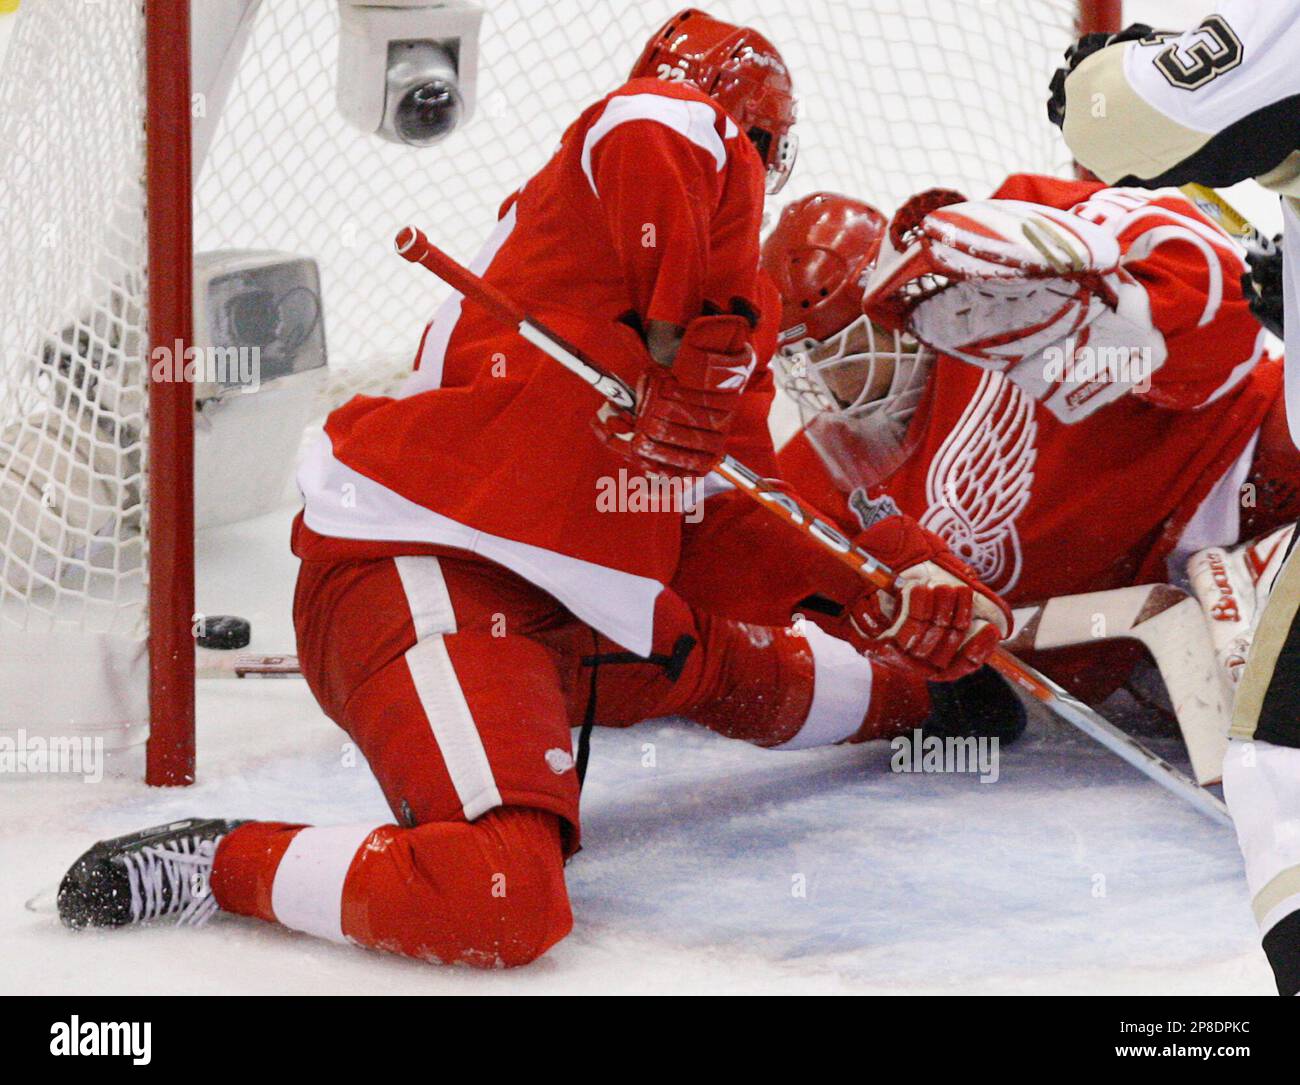 Detroit Red Wings goalie Chris Osgood, right, and teammate Brad Stuart watch as a goal by Pittsburgh Penguins Evgeni Malkin goes into the net during first period of Game 2 of the